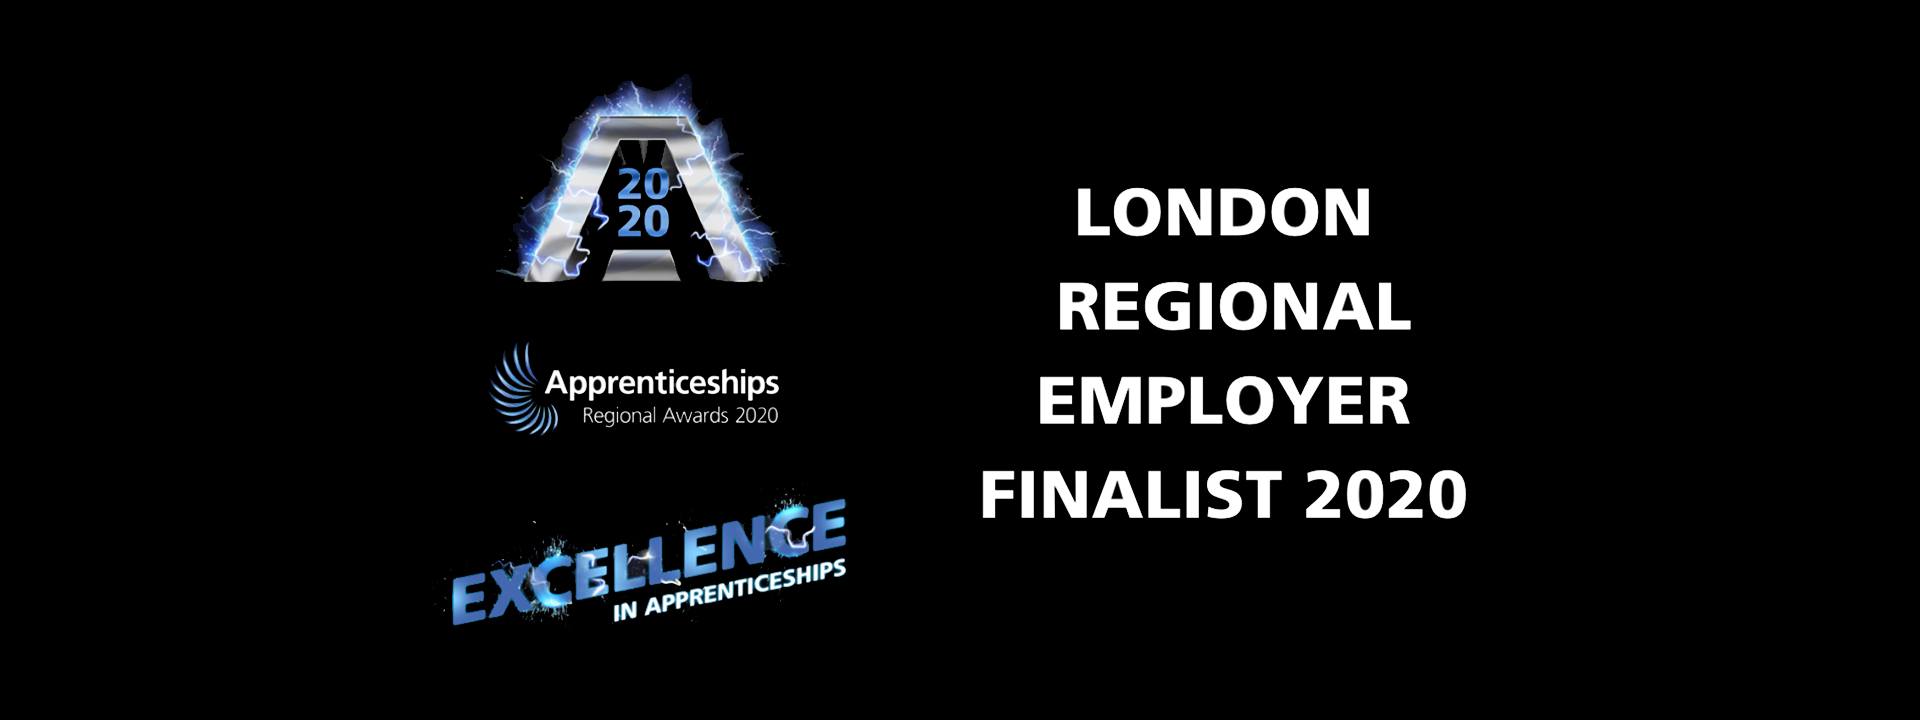 TB+A shortlisted in the London Regional Final of the National Apprenticeship Awards 2020